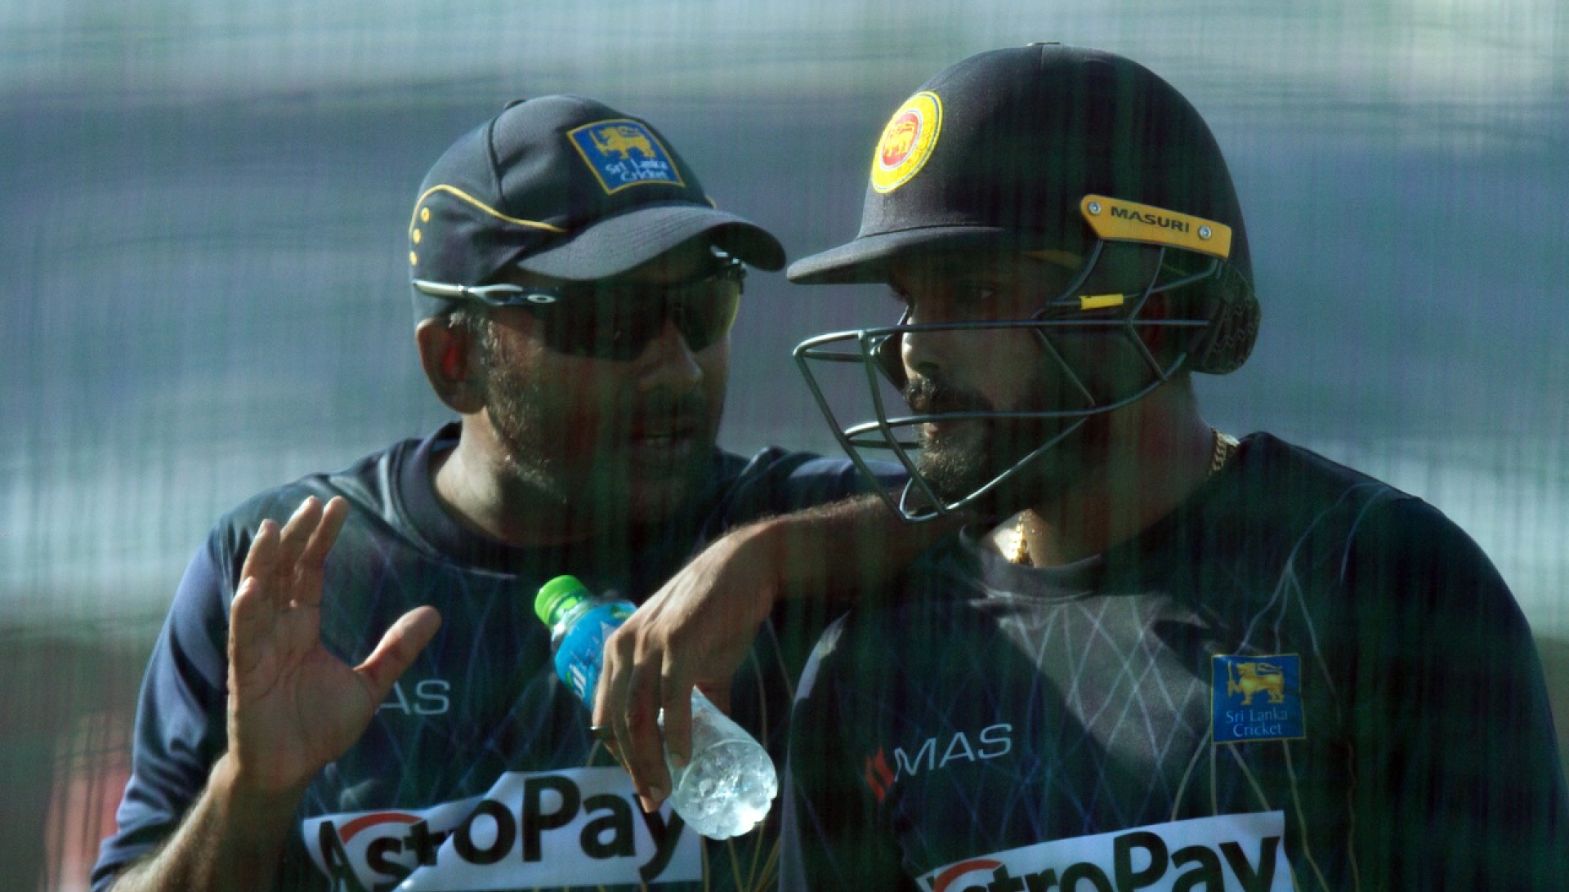 Been away for more than 135 days from my daughter: SL consultant Jayawardene to leave WC bubble